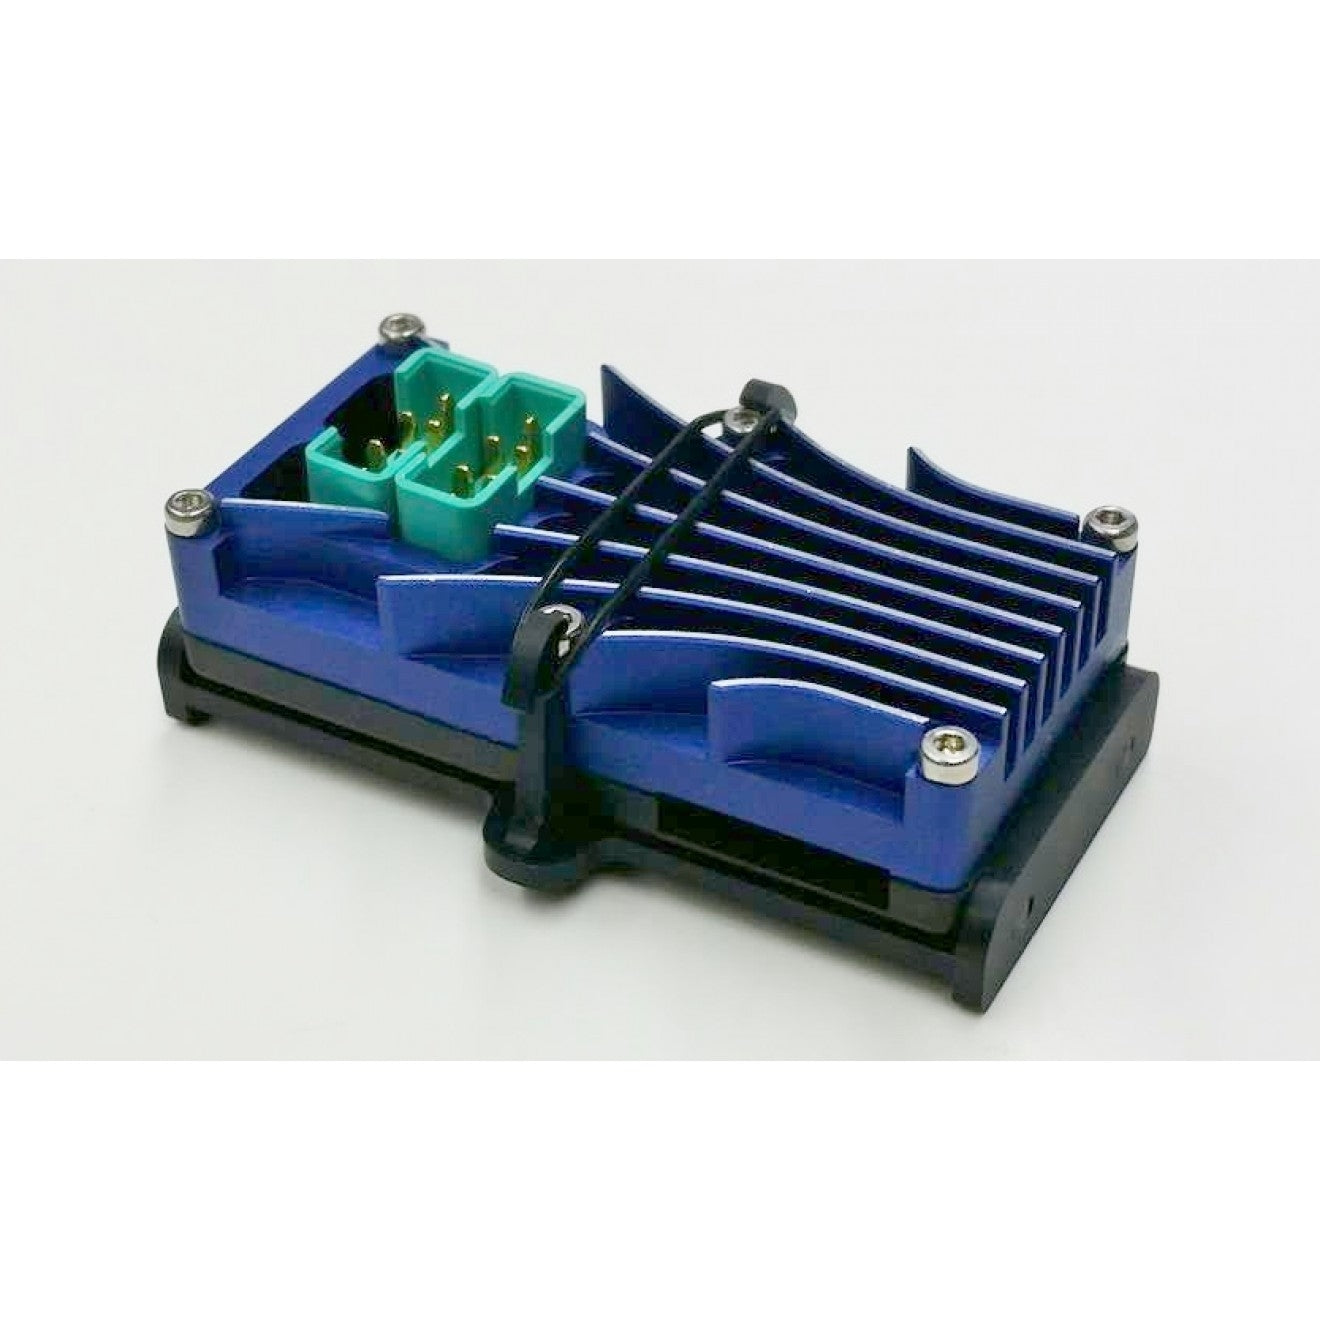 PowerBox Systems Gemini 2 Click Holder from STV-Tech 021-07